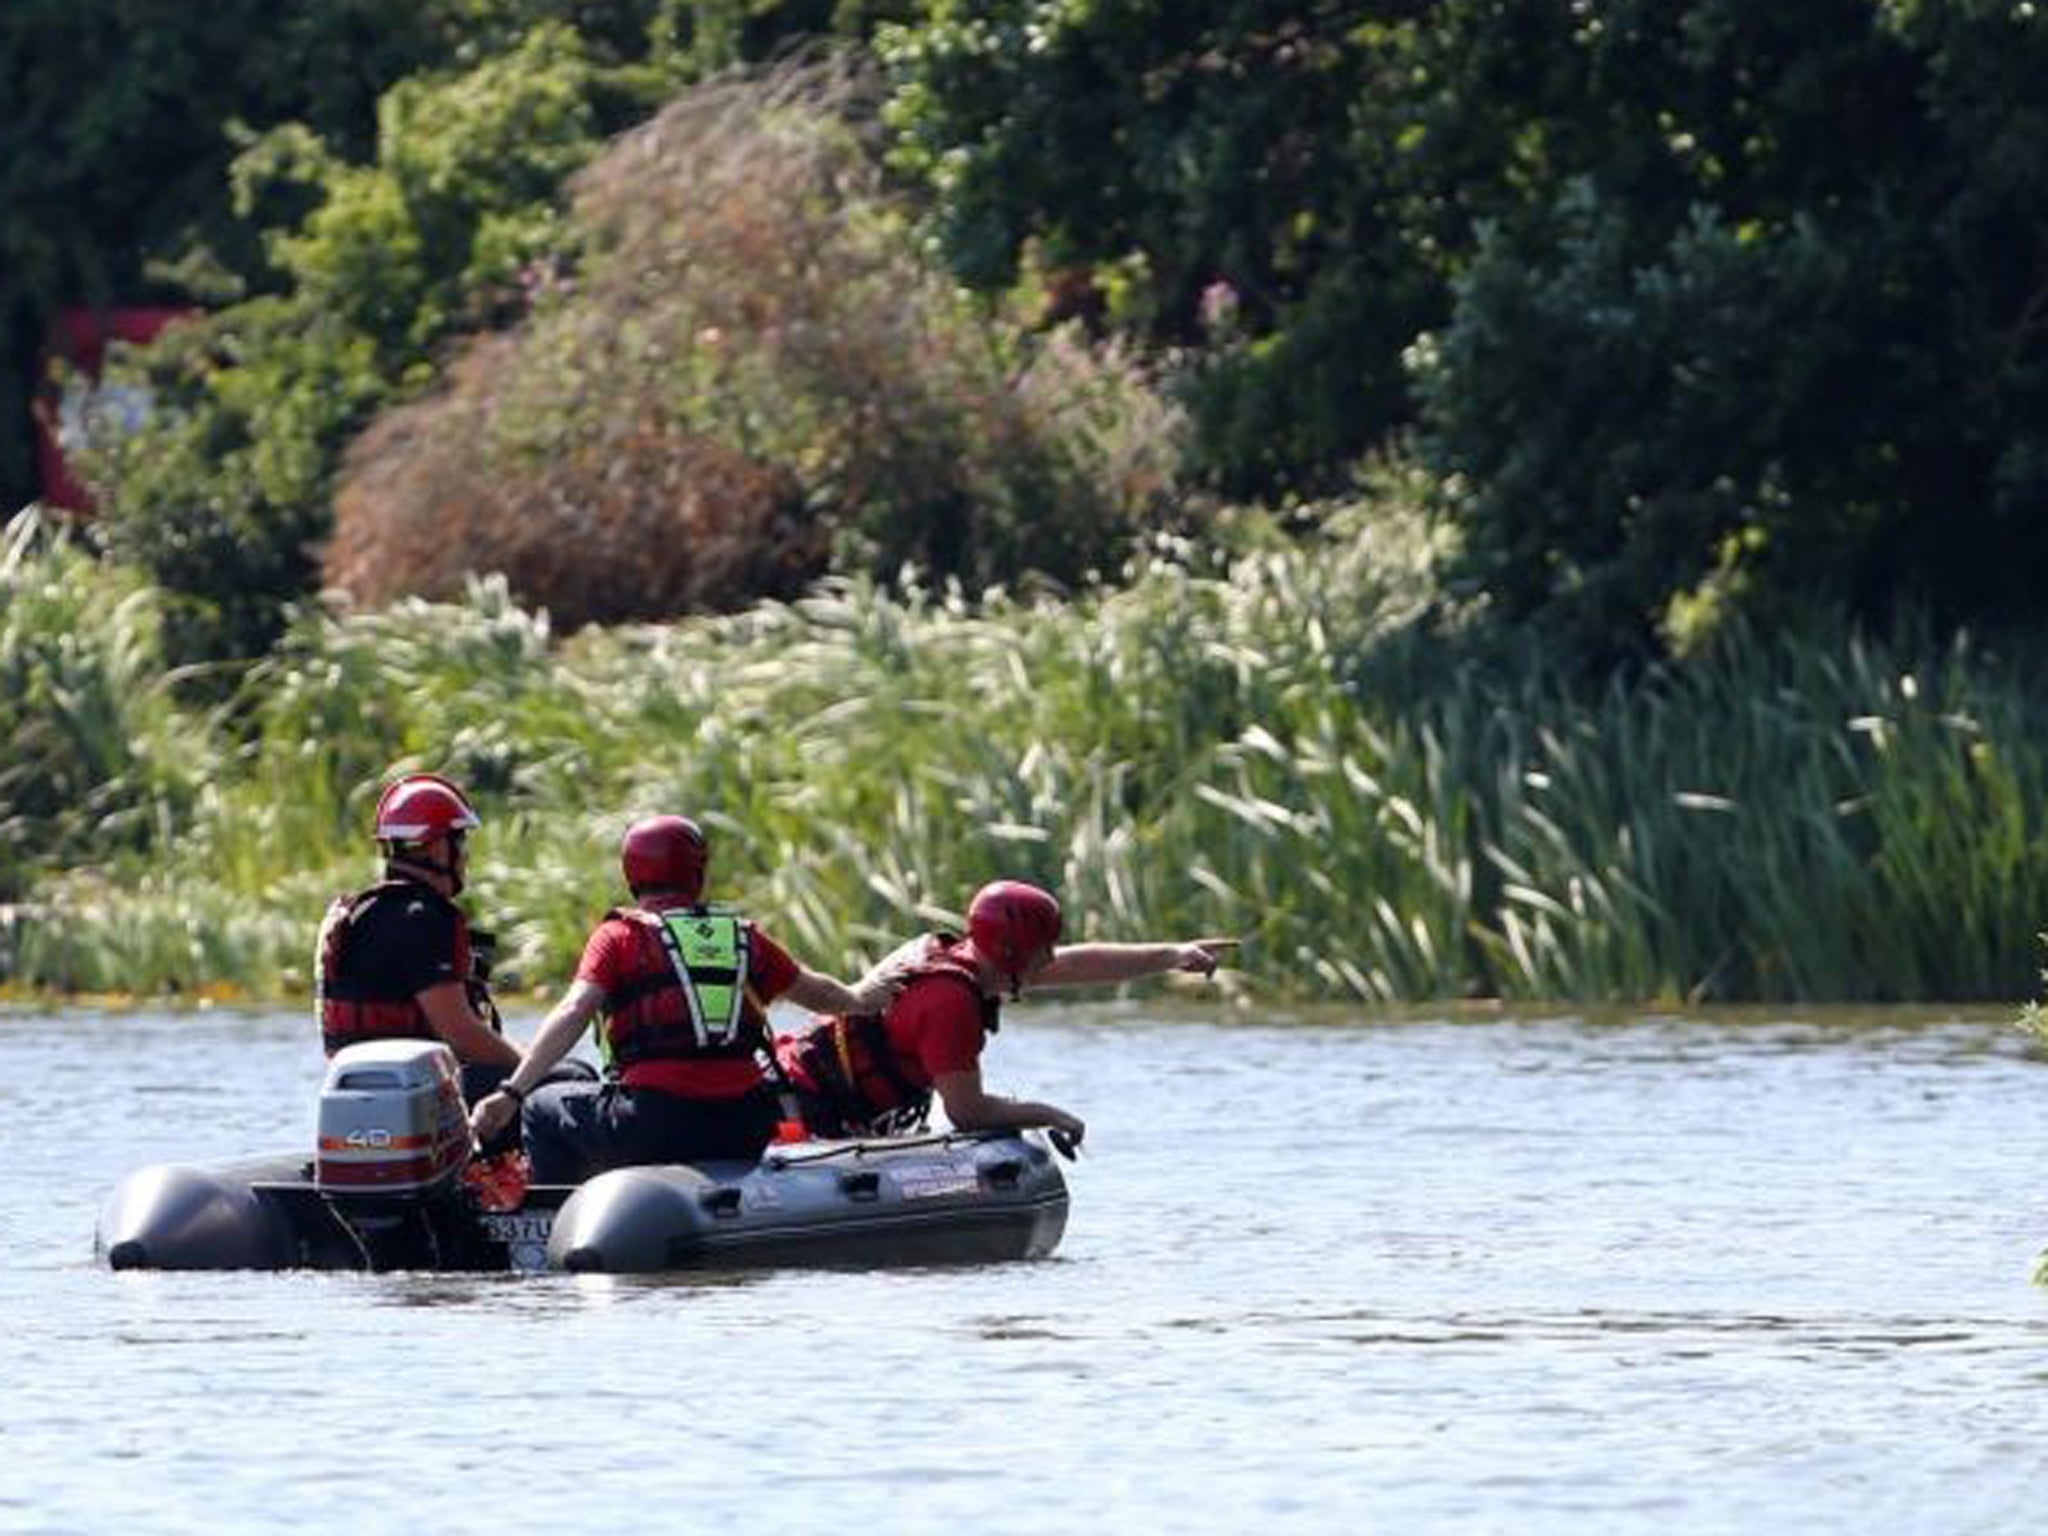 Norfolk Fire and Rescue search the Broad on the campus of the University of East Anglia